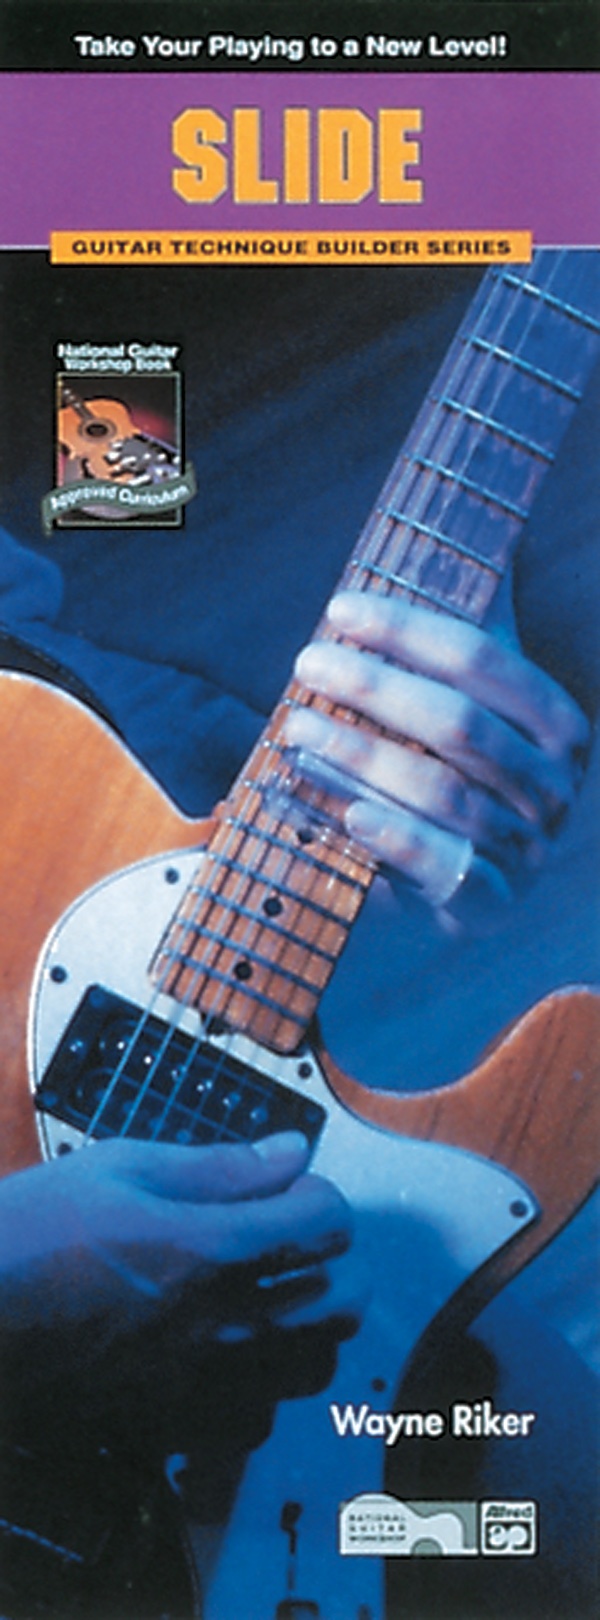 Guitar Technique Builders Series: Slide Take Your Playing To A New Level! Book